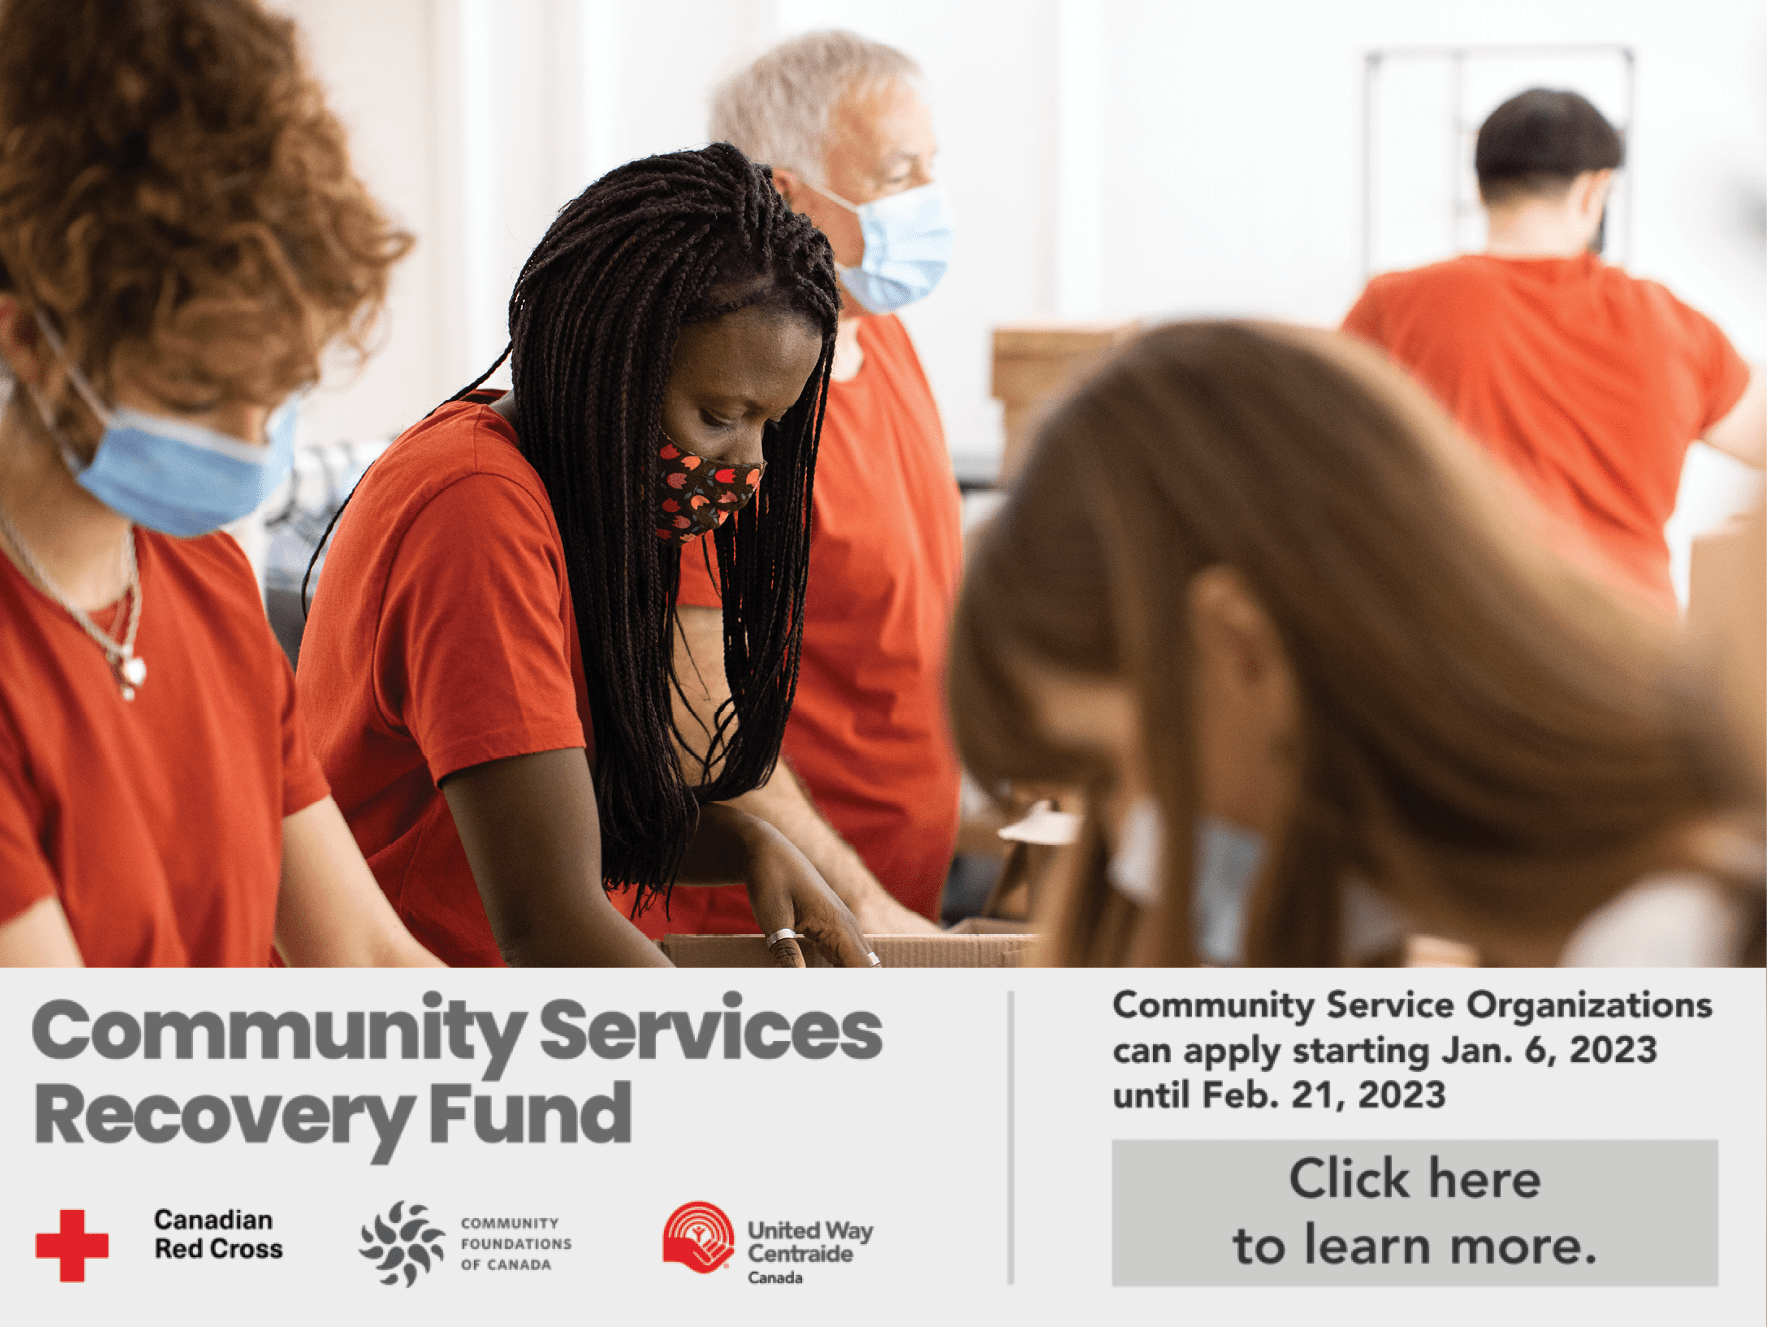 Community Services Recovery Fund - Click here to learn more